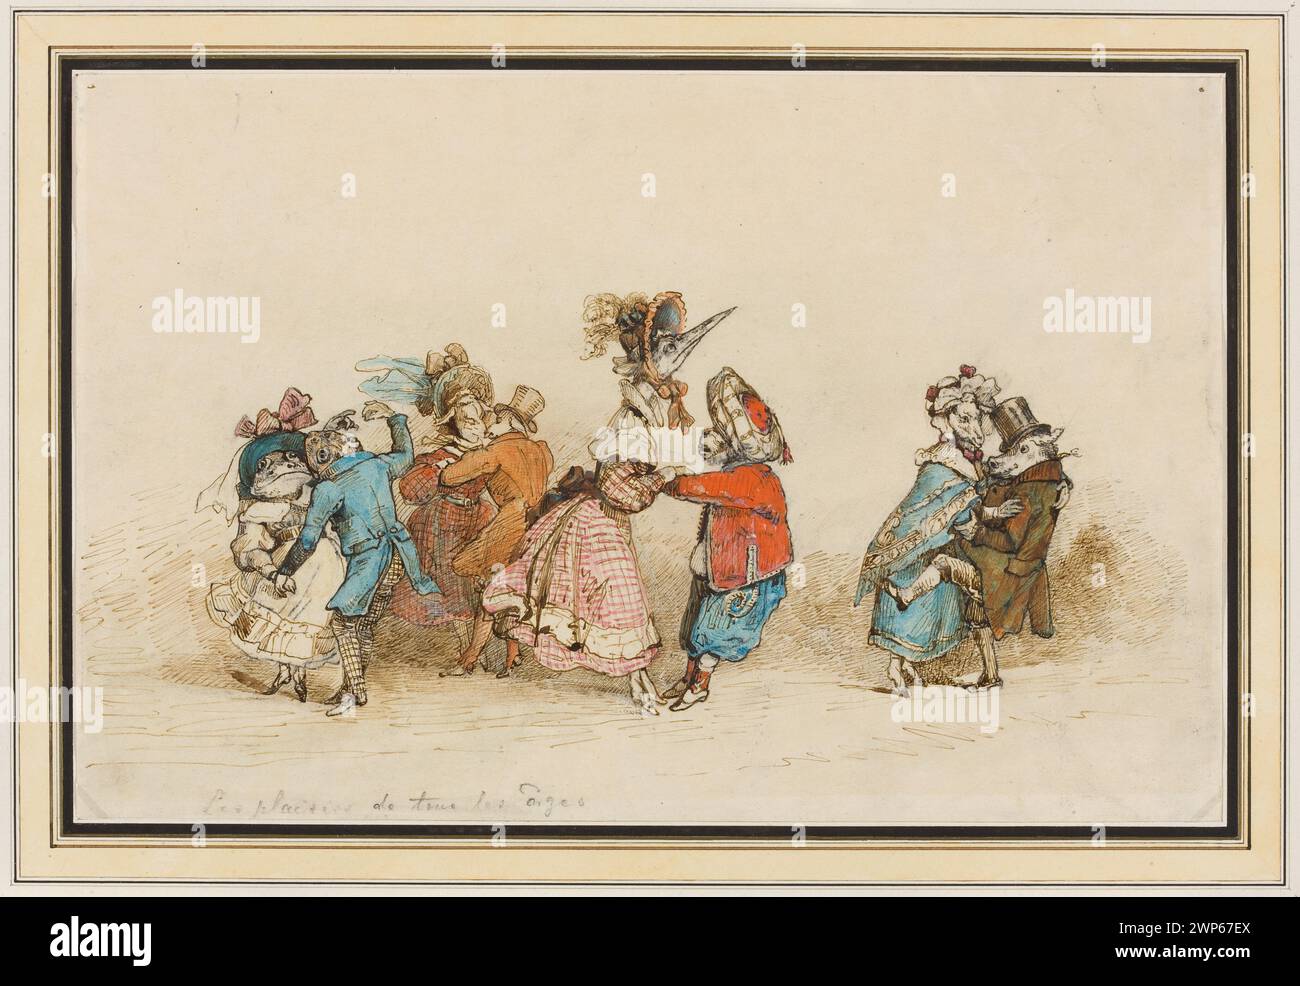 Four pairs of people of animals; Grandville, Jean-Jacques (1803-1847); before 1829 (1825-00-00-1835-00-00);Bloch, Jan Gottlib (1836-1902), Bloch, Jan Gottlib (1836-1902)-collections, Grandville, Jean Jacques (1803-1847). Les Métamorphoses du Jour, Society of Encouragement of Fine Arts (Warsaw - 1860-1940) - collection, illustrations, moral caricatures, projects, illustration projects, French drawings, dance, dance (genre scenes), waltz, dance, animals Stock Photo